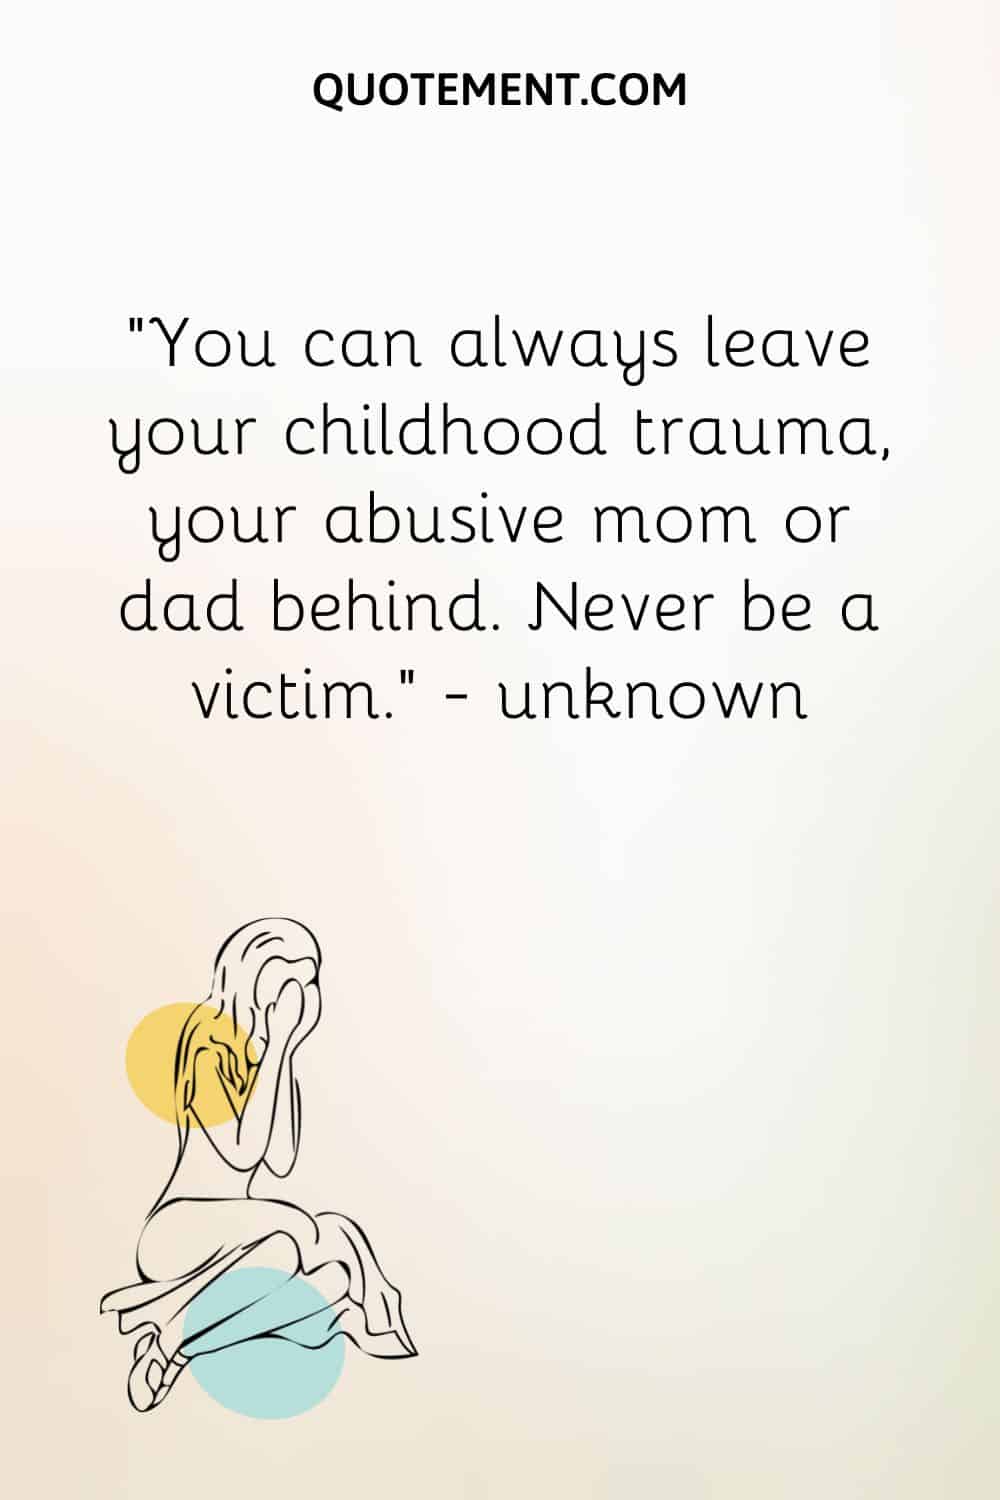 You can always leave your childhood trauma, your abusive mom or dad behind